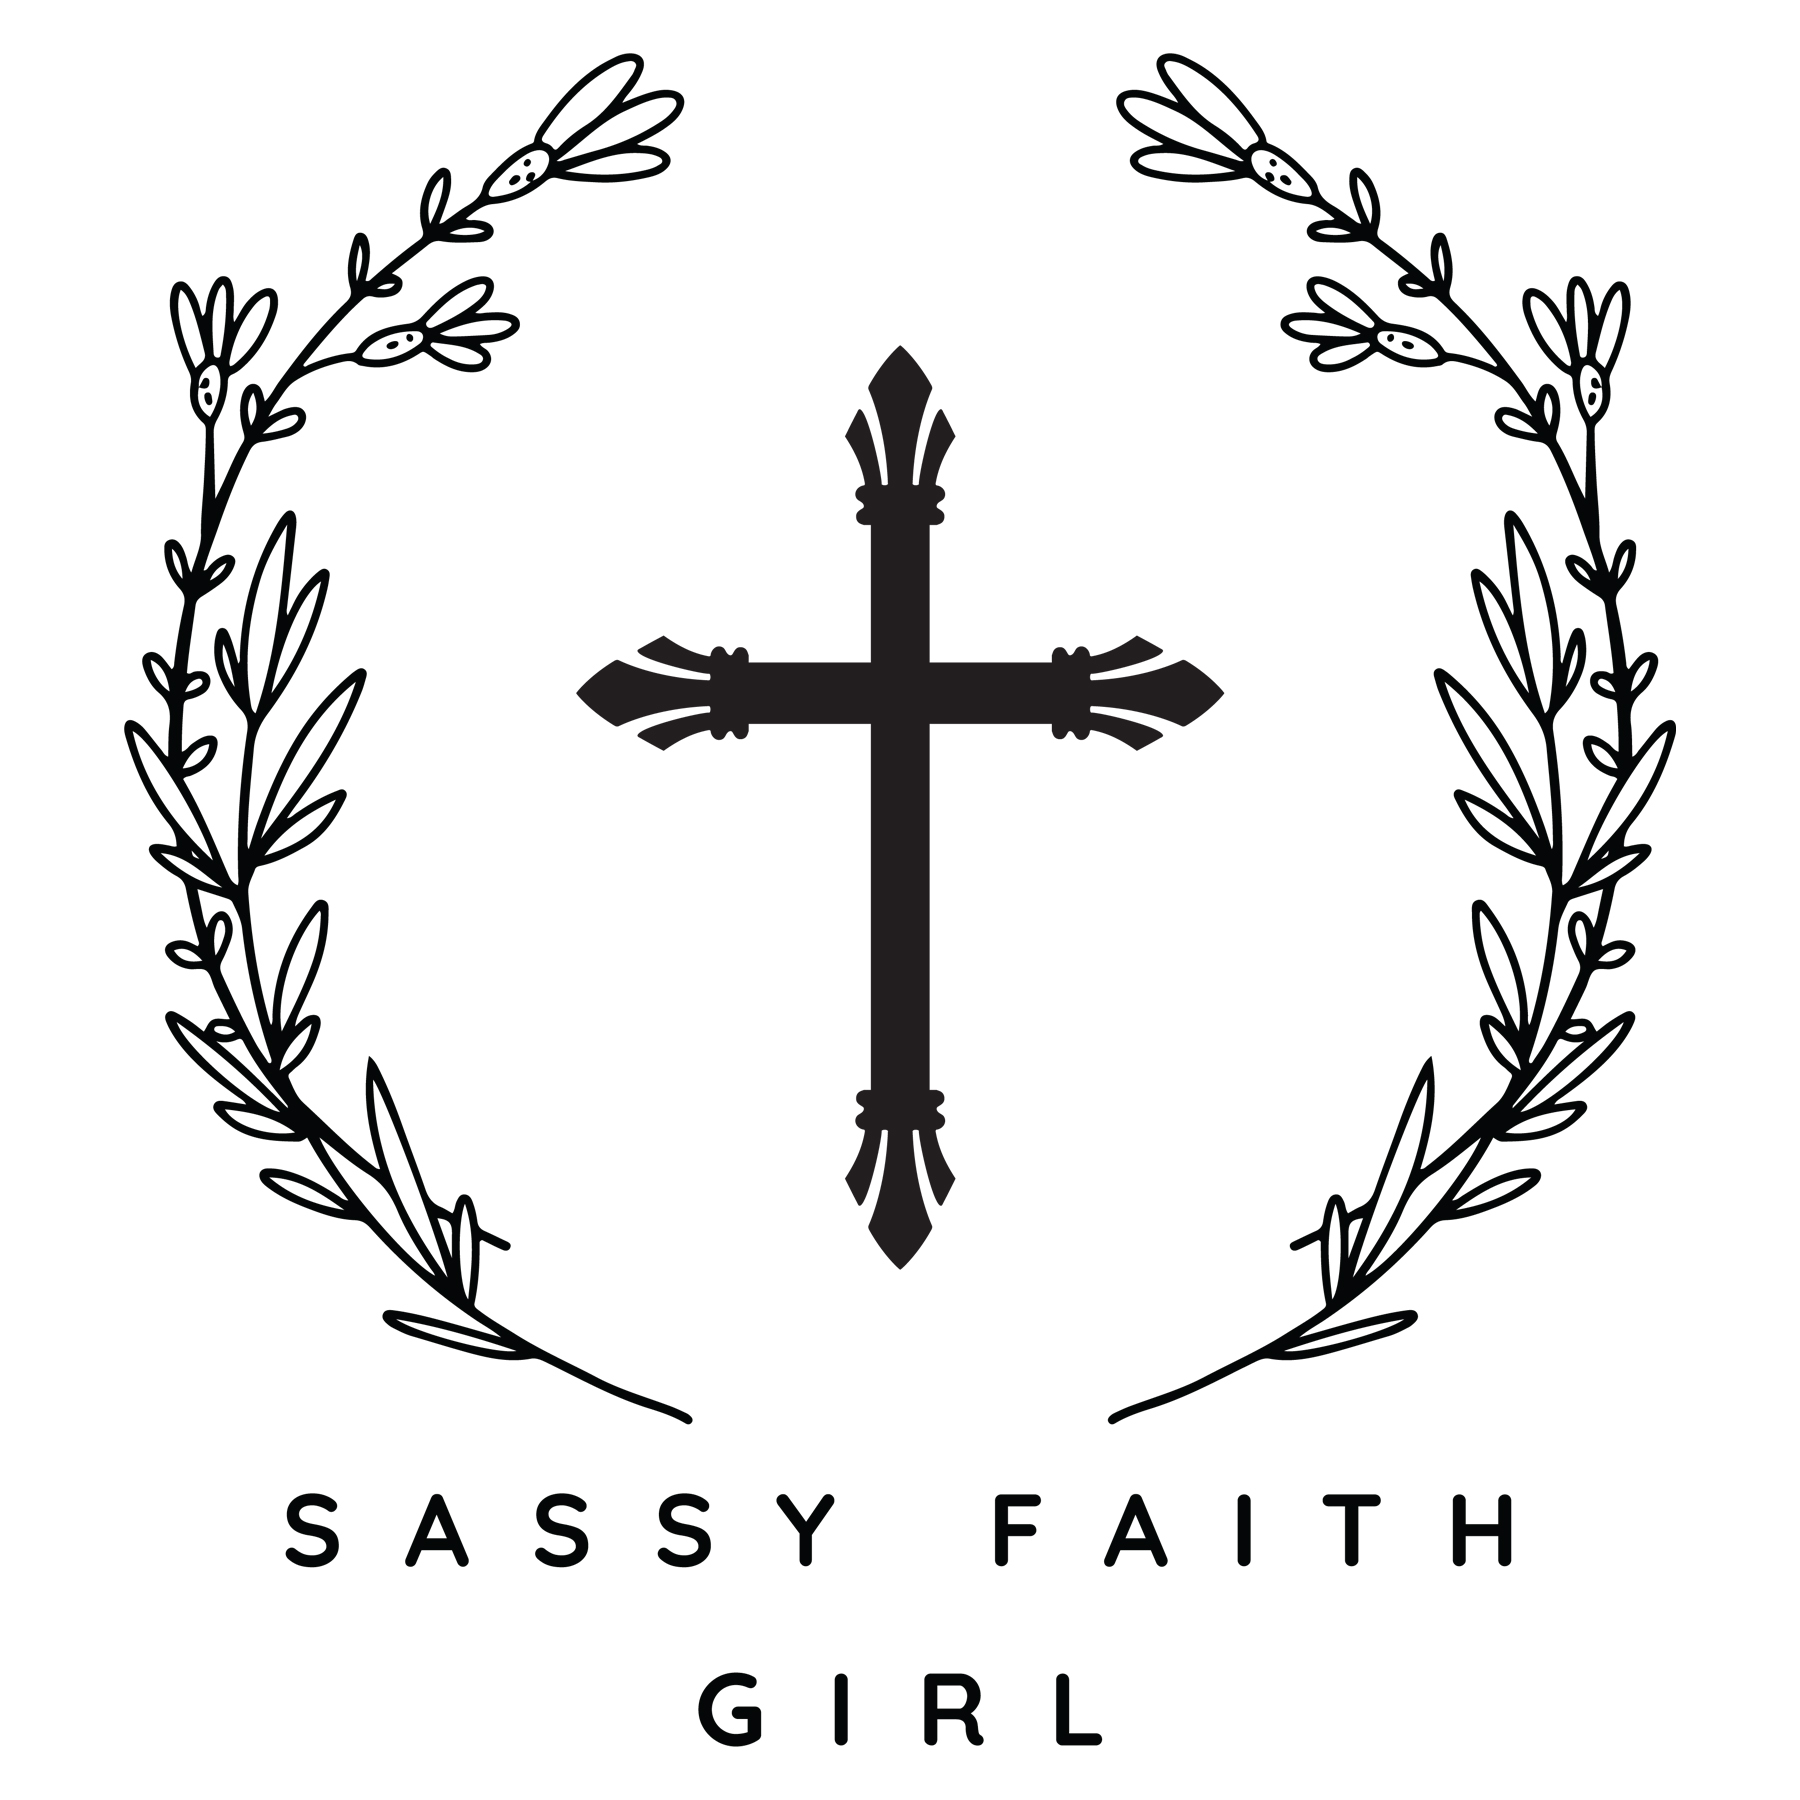 sassy faith girl christian information logo with two leaf motifs in the center a decrotive cross